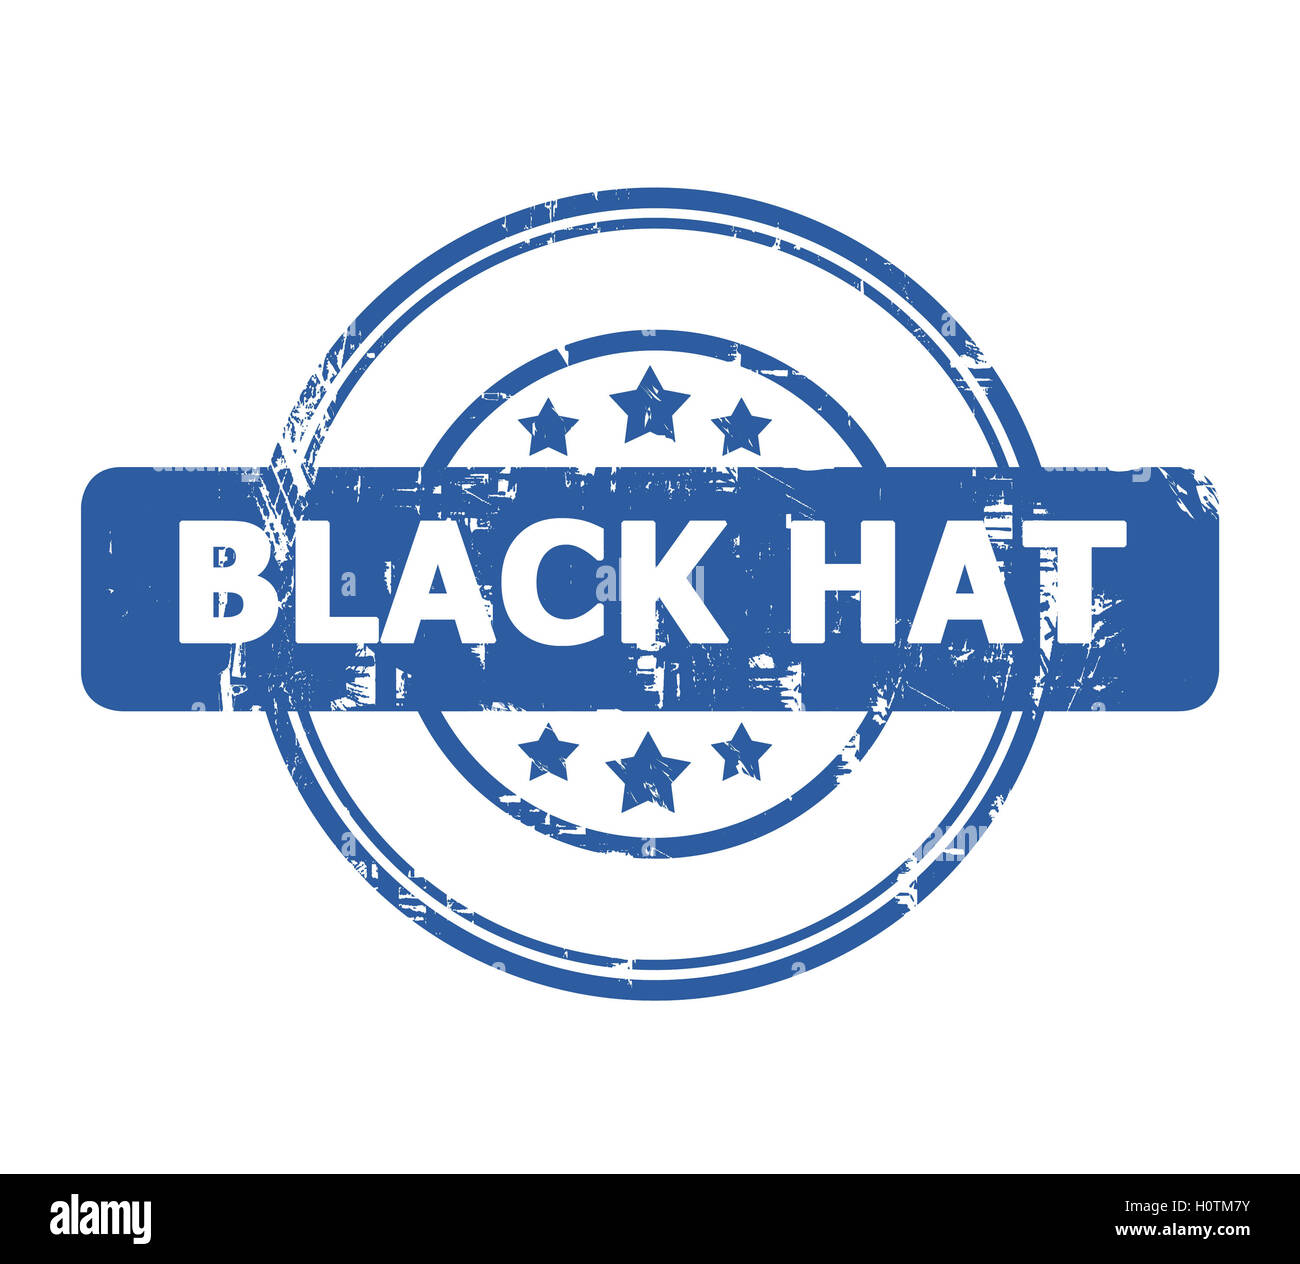 Black Hat stamp with stars isolated on a white background. Stock Photo